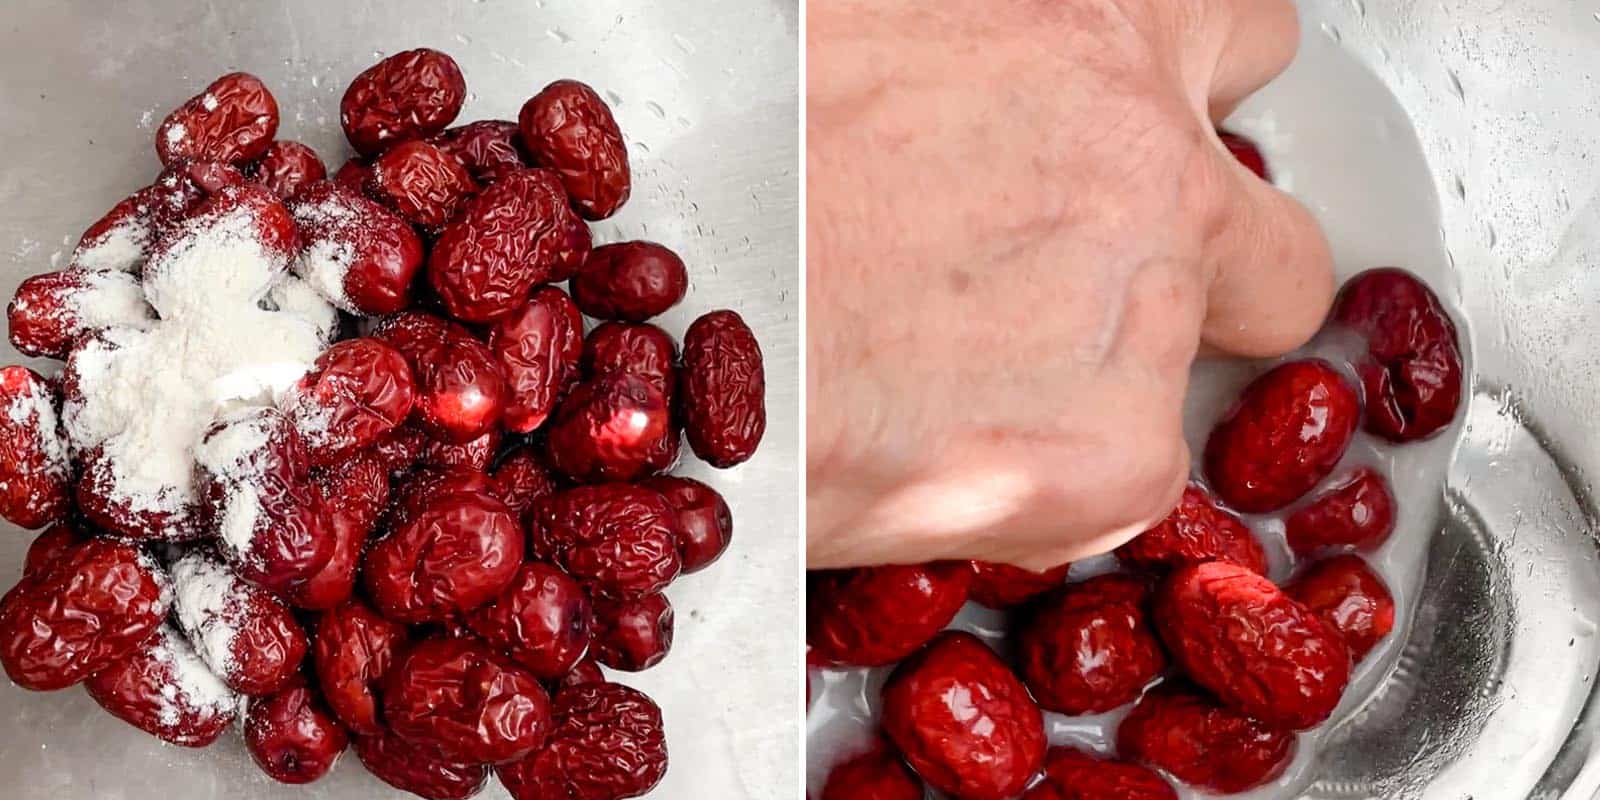 Rinsing Red Dates with salt and flour